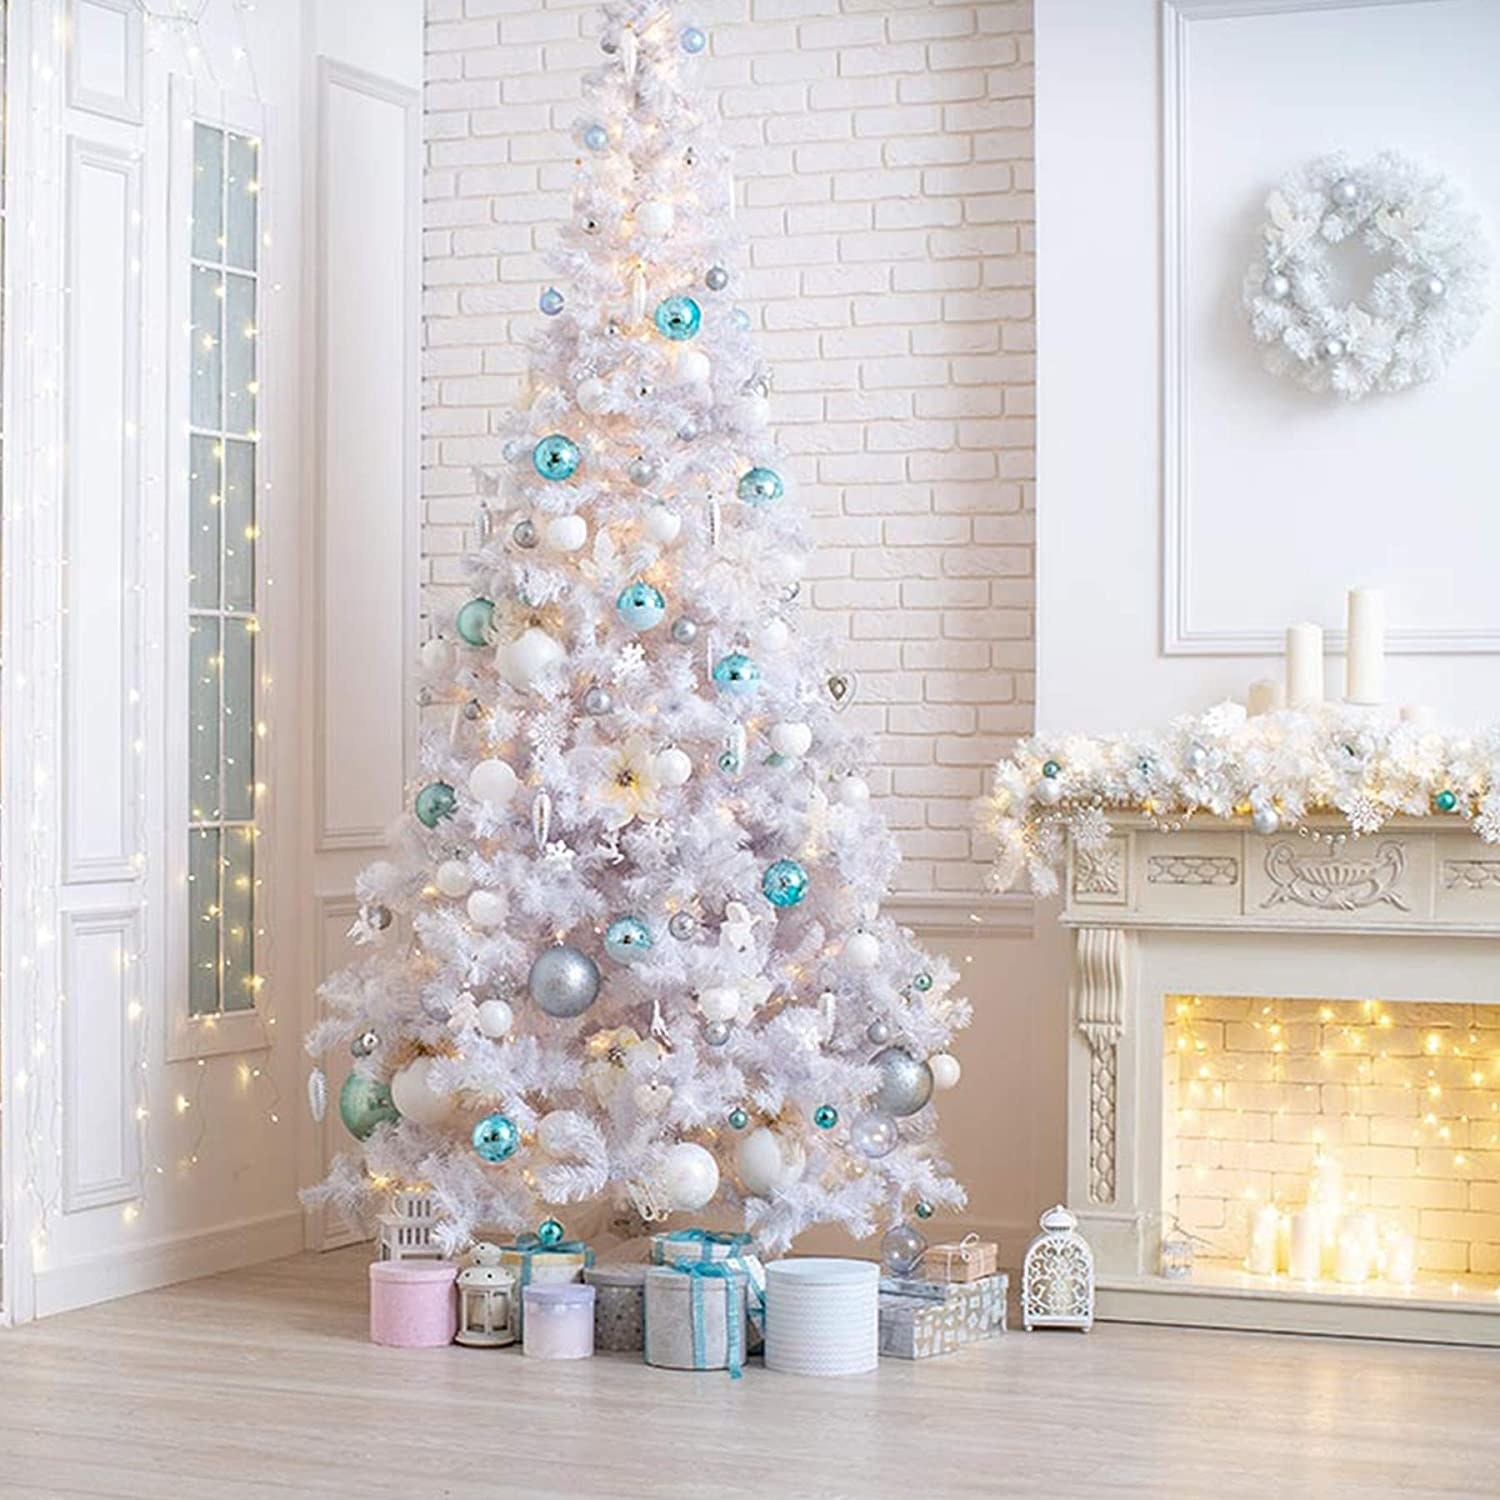 28 Pieces Of Chic Christmas Decor That Aren’t Red Or Green